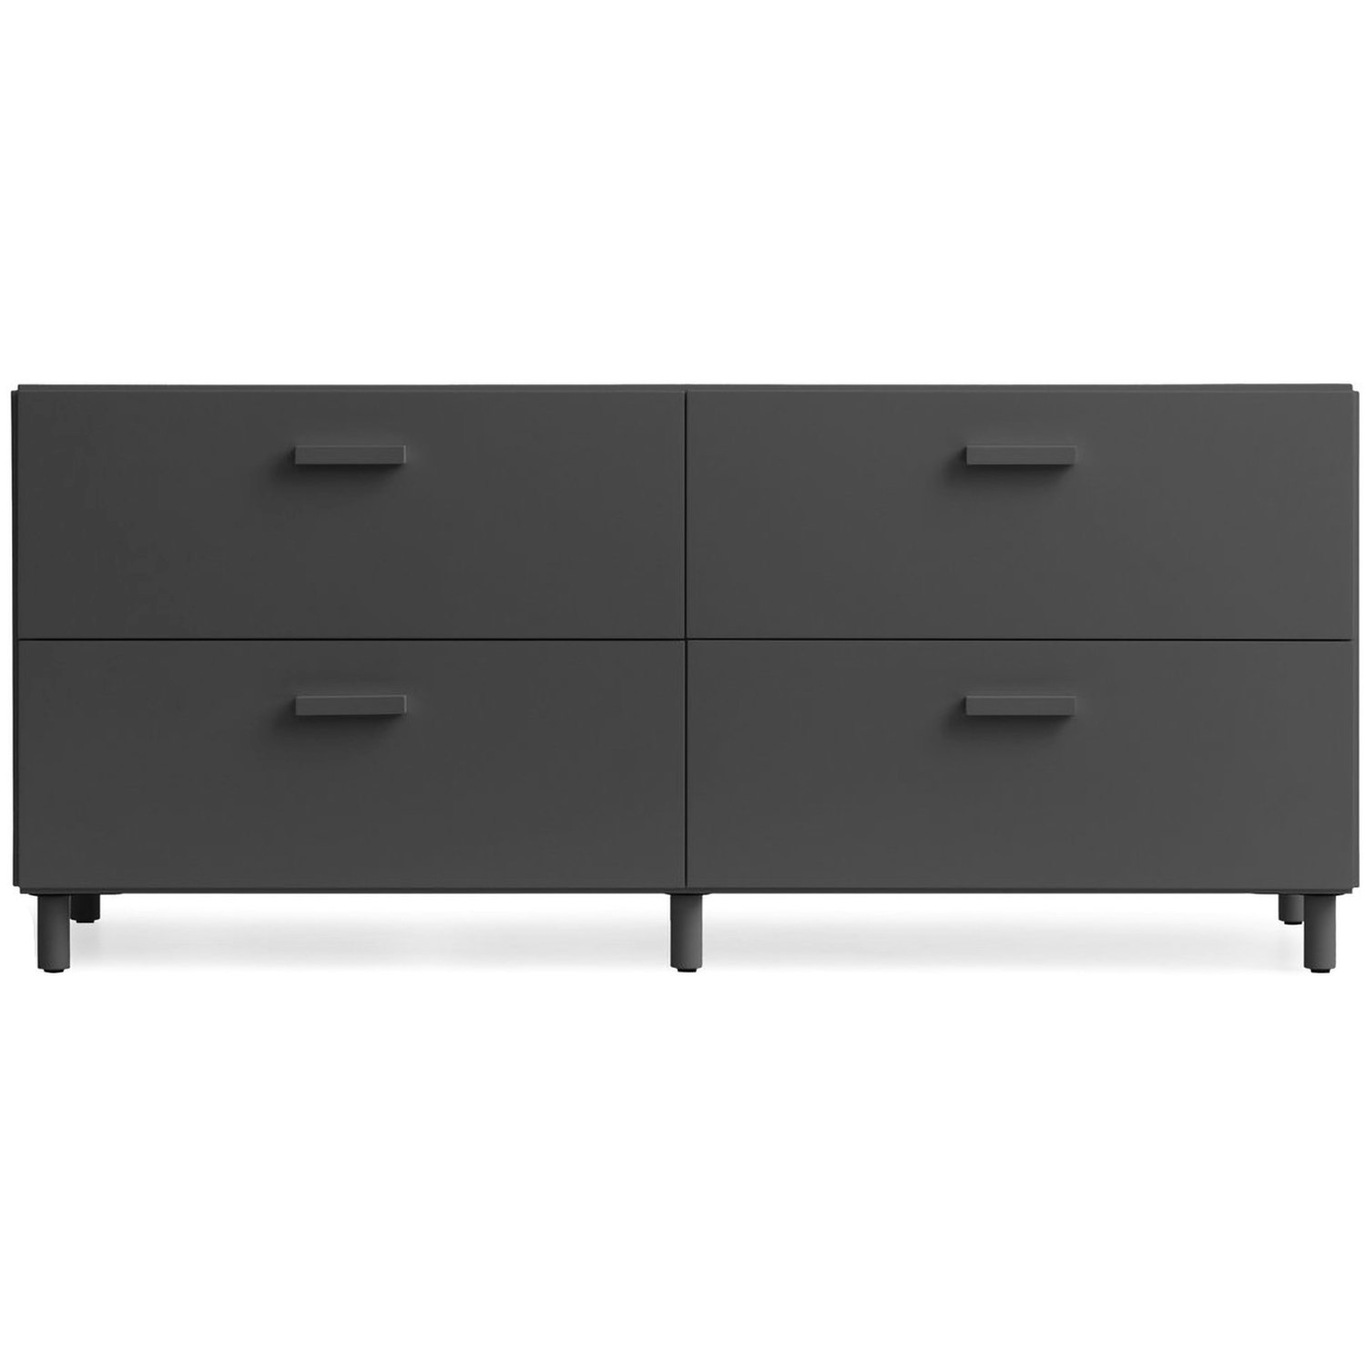 Relief Chest Of Drawers Low With Legs, Grey